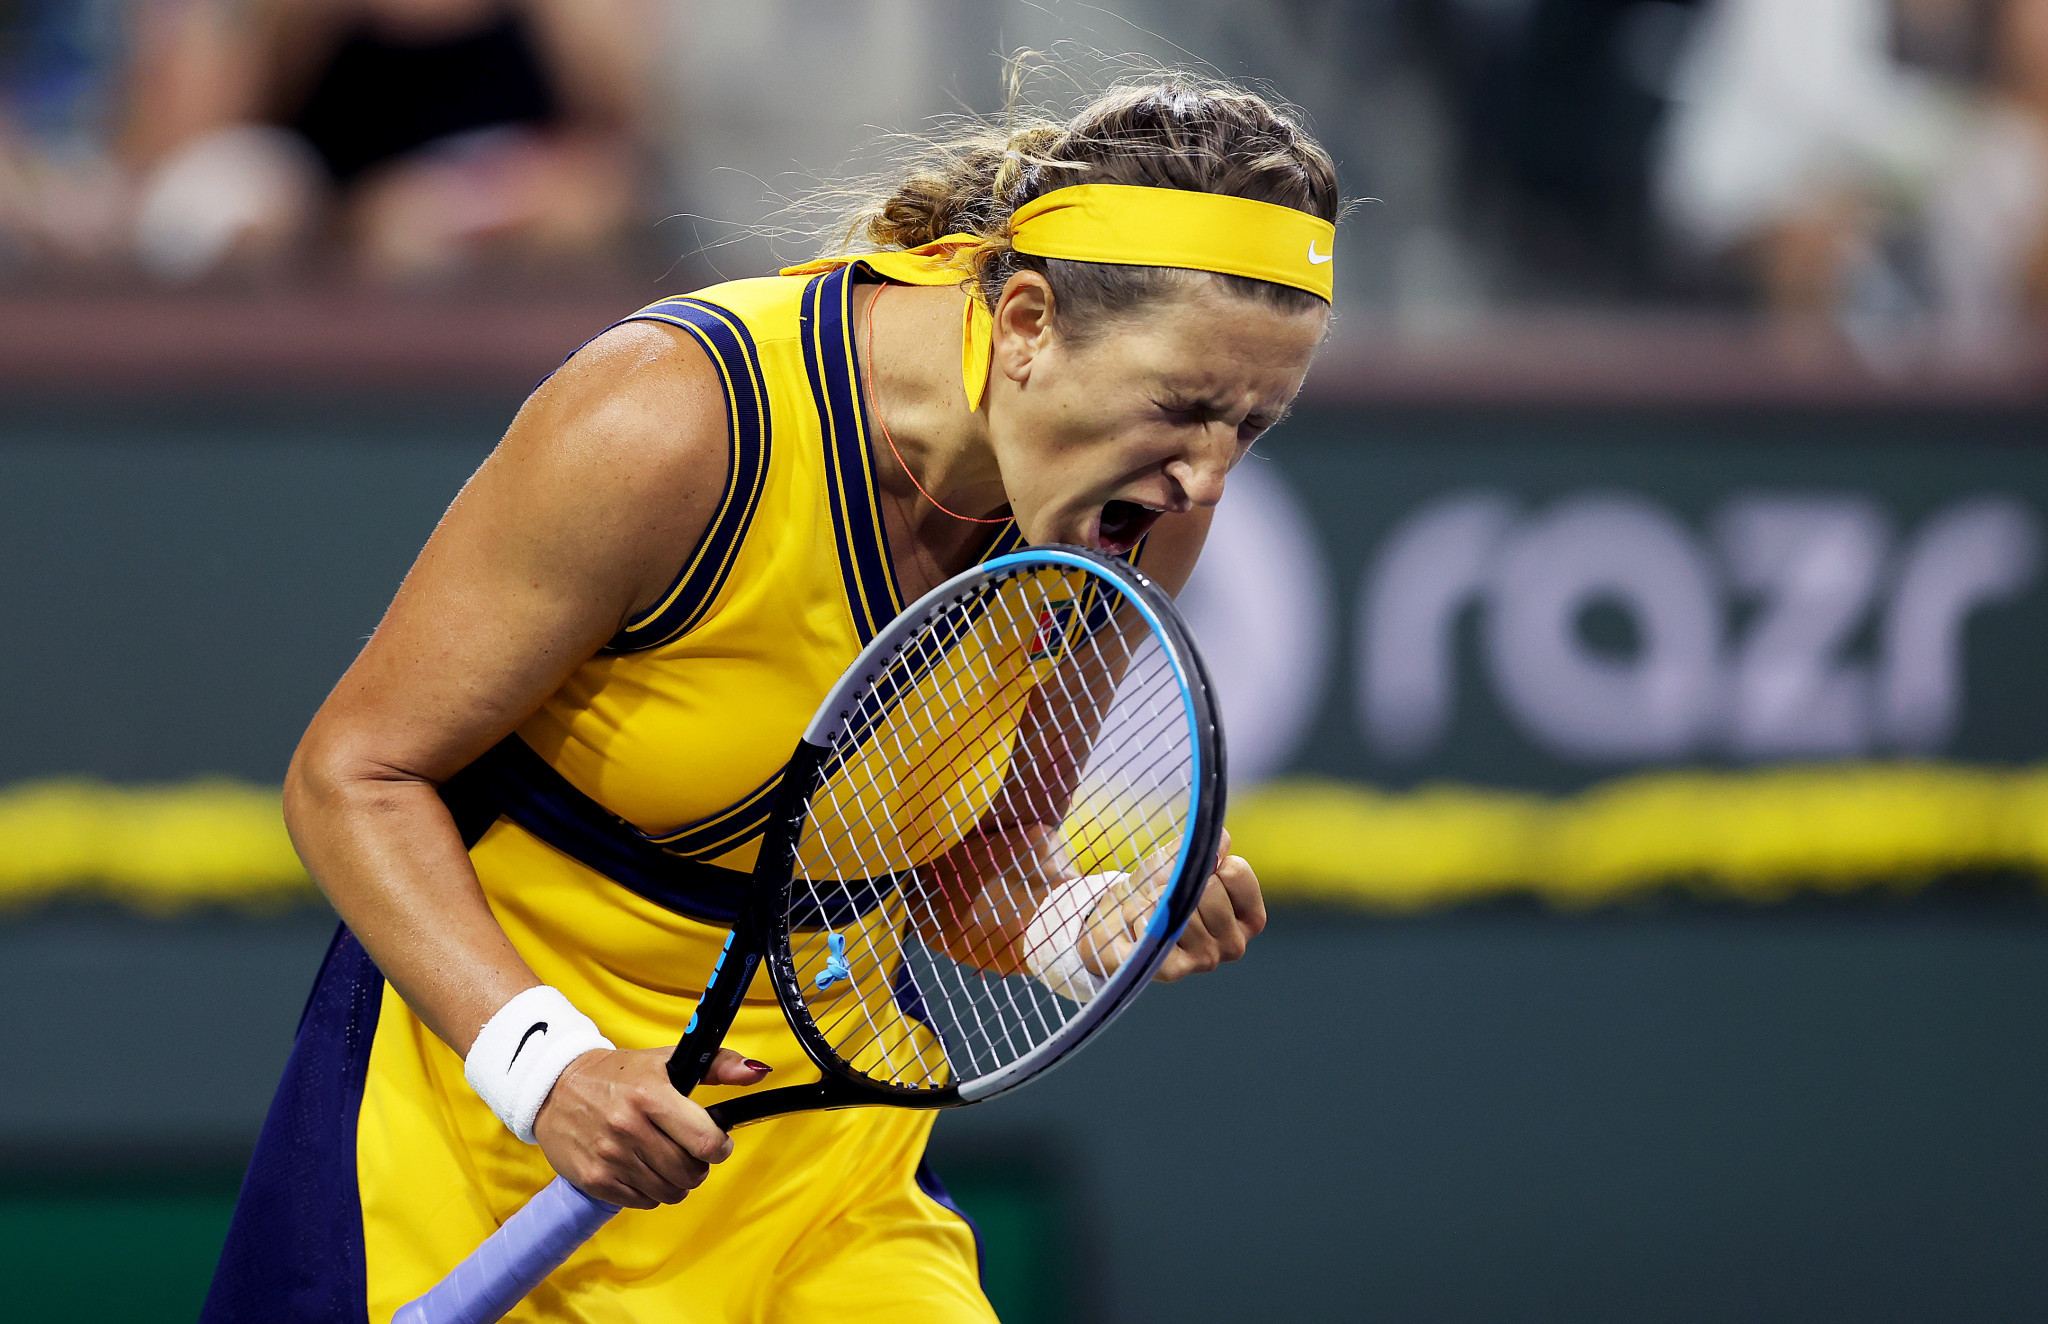 Victoria Azarenka won the Indian Wells Masters women's singles in 2012 and 2016 ©Getty Images